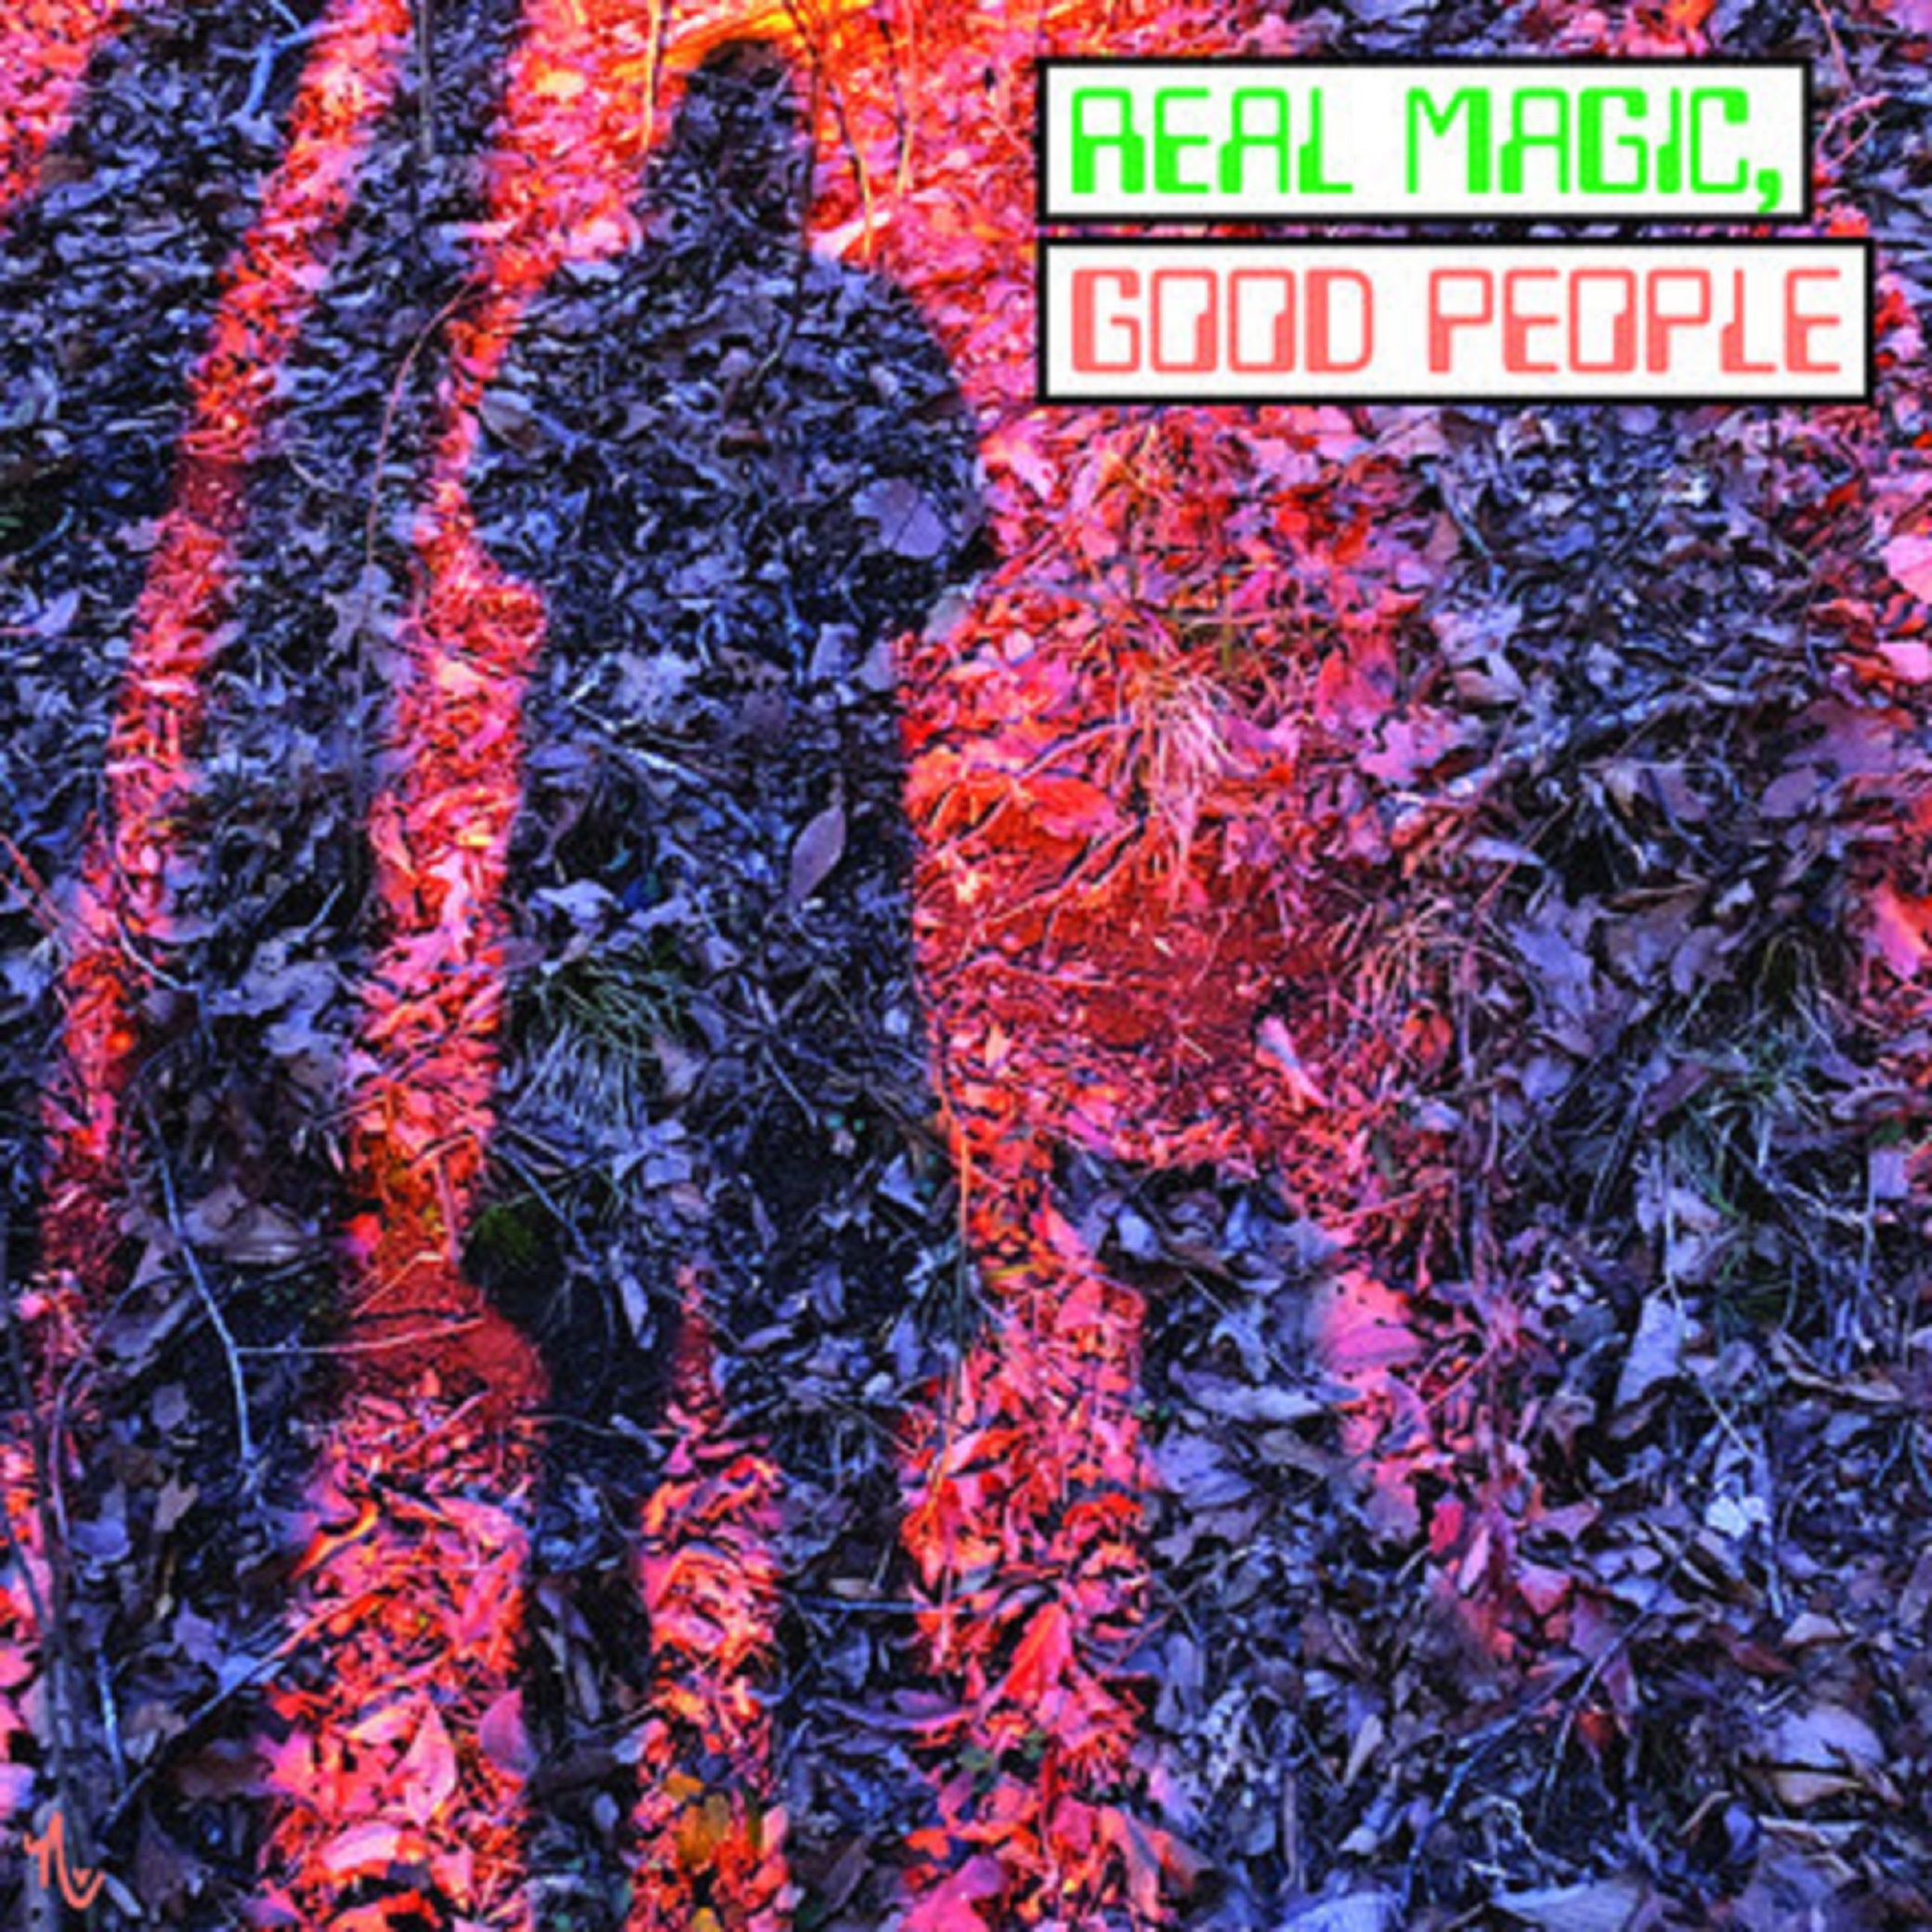 BOB MARSTON & THE CREDIBLE SOURCES RELEASE NEW SINGLE “REAL MAGIC, GOOD PEOPLE”